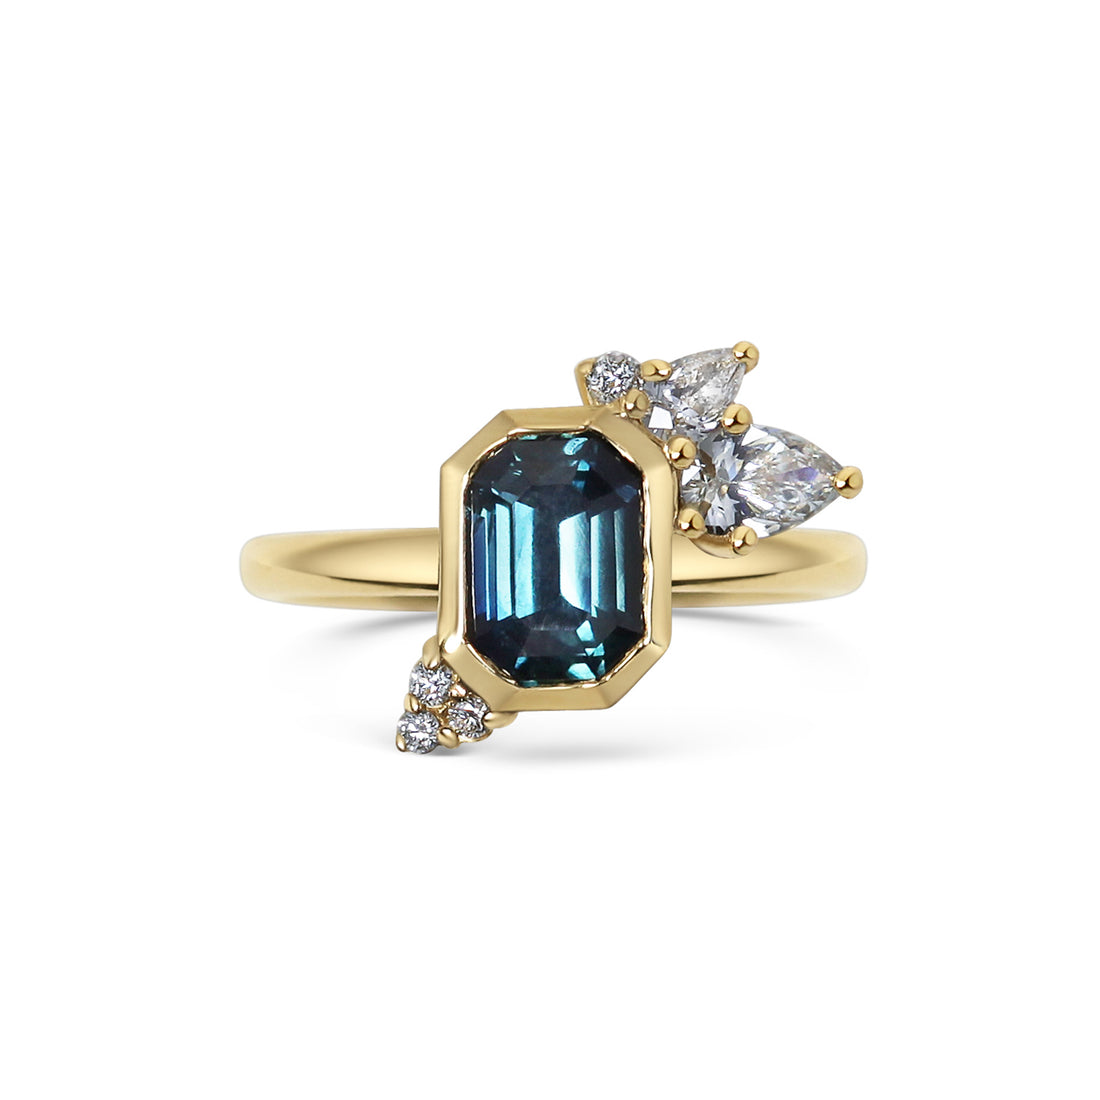  Bespoke Sapphire & Diamond Ring by Michelle Oh | The Cut London